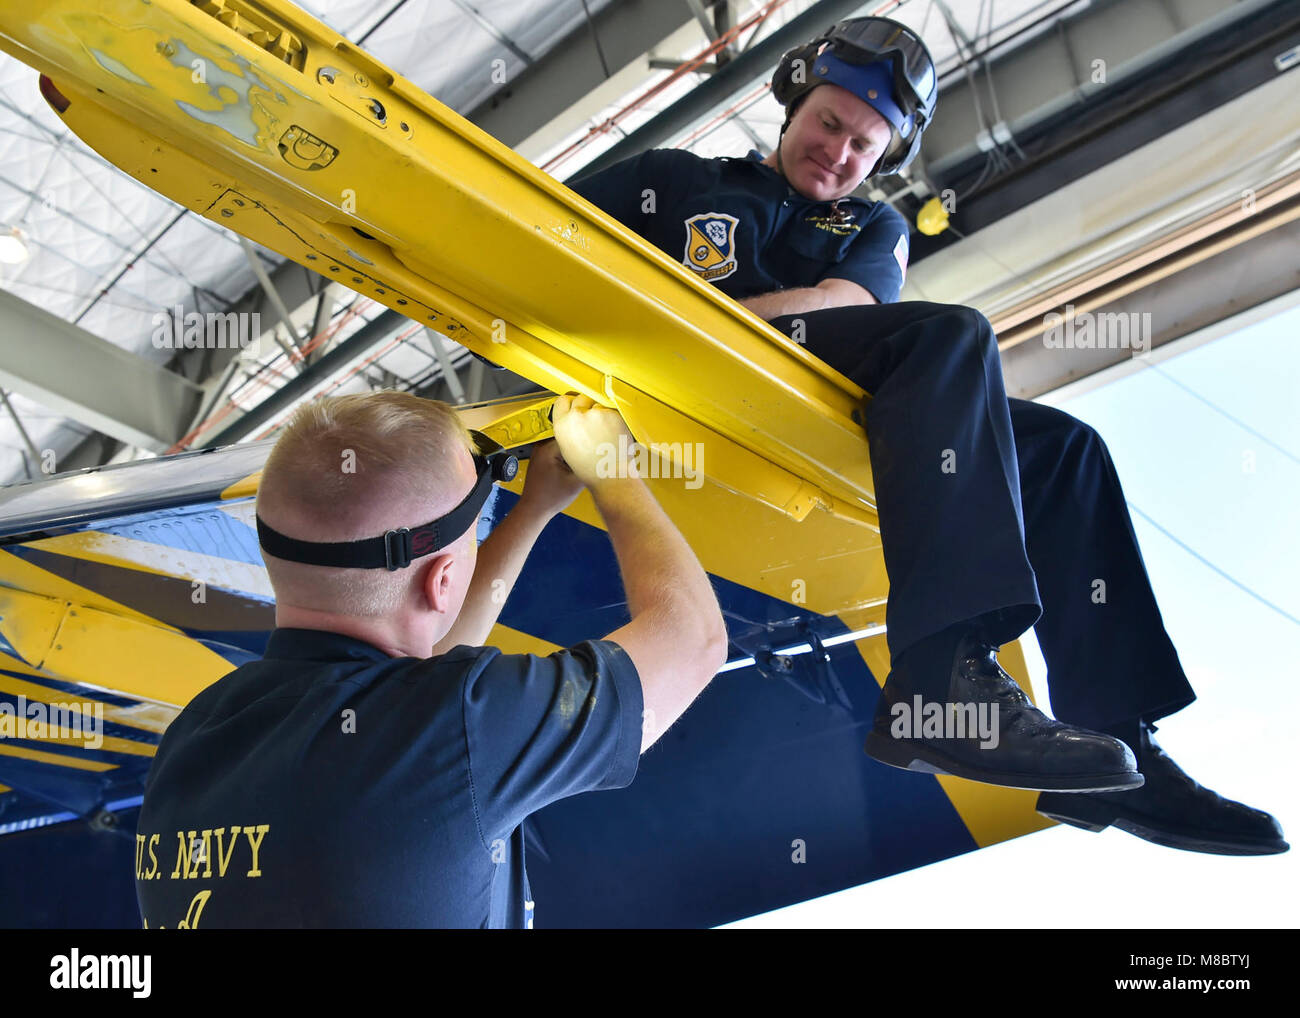 EL CENTRO, Calif. (Feb. 22, 2018) Aviation Structural Mechanic 1st Class, T.J. Dickey, and Aviation Structural Mechanic 1st Class, Joe Hopkins, perform maintenance on a leading edge flap . The Blue Angels are scheduled to perform more than 60 demonstrations at more than 30 locations across the U.S. in 2018. (U.S. Navy Stock Photo